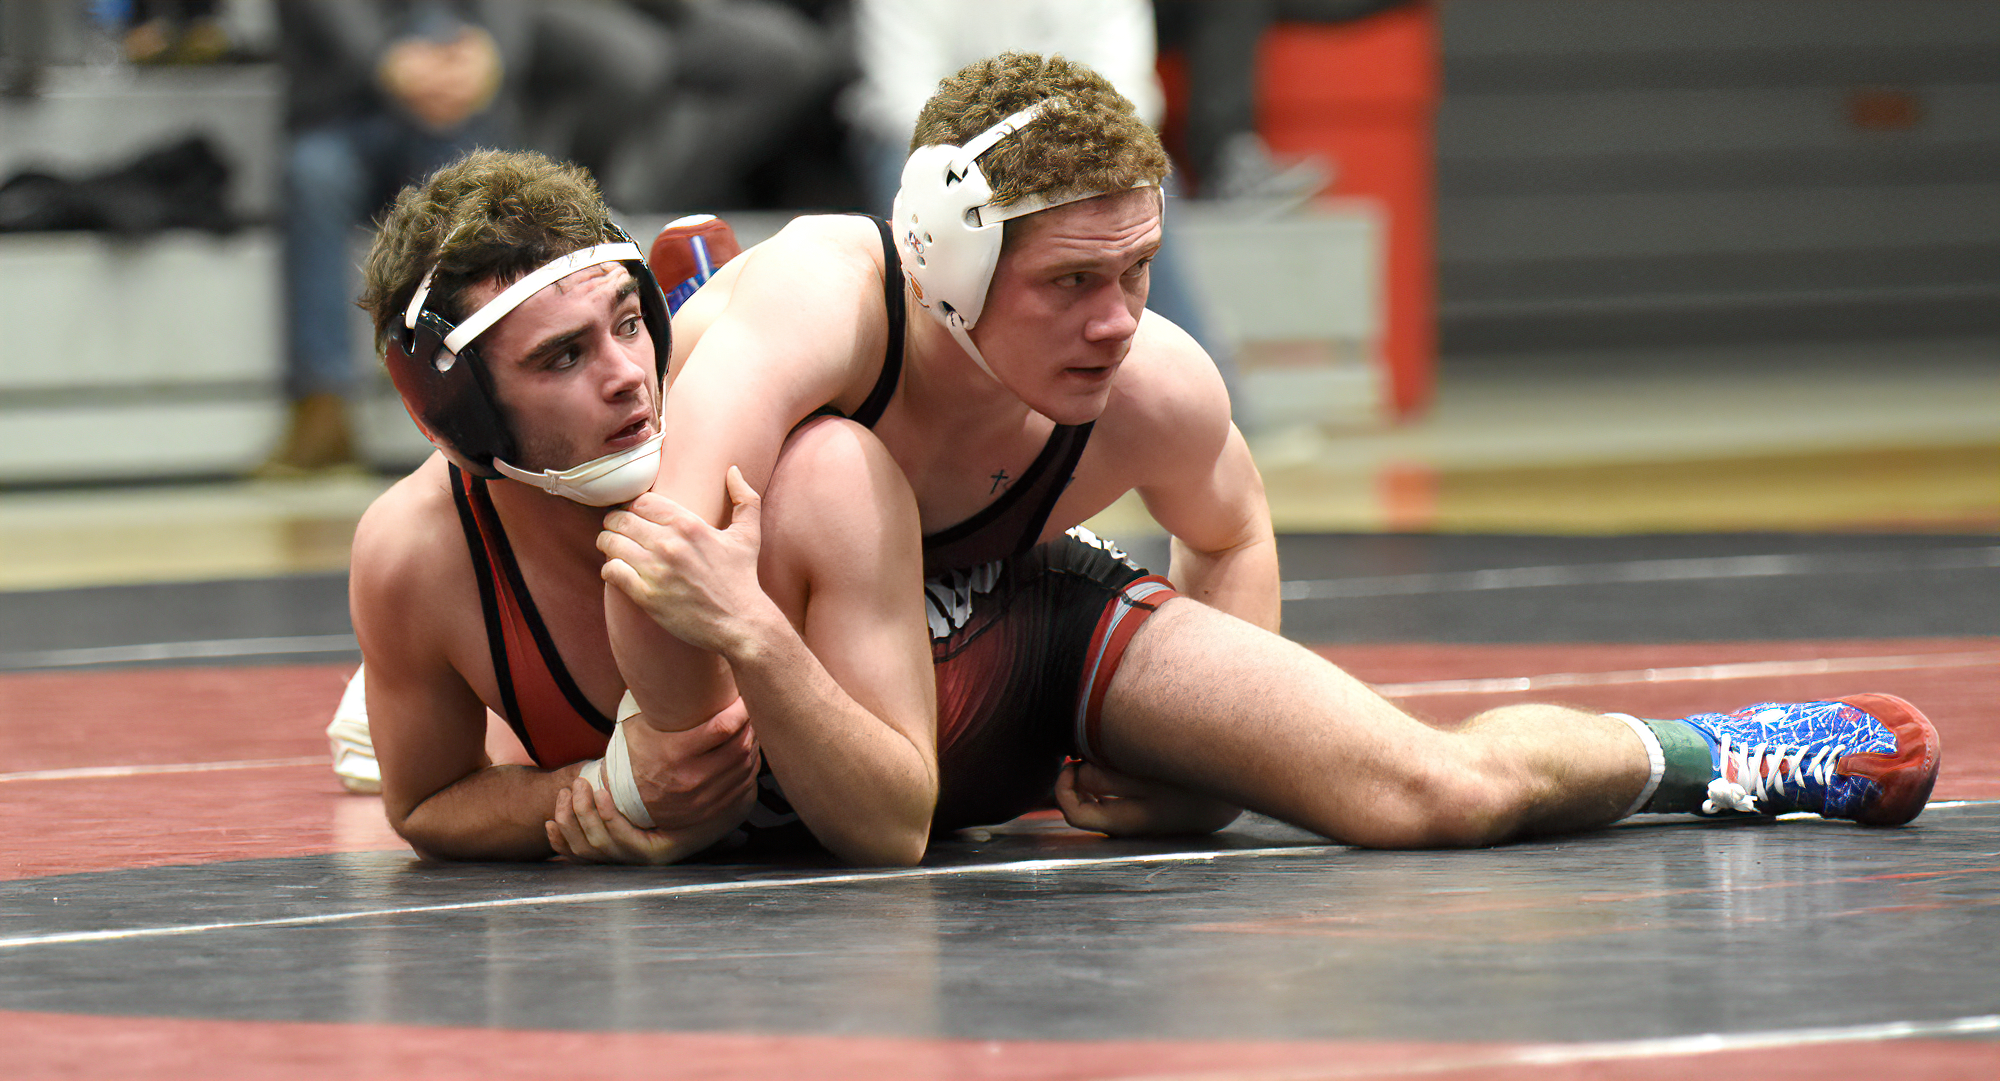 Senior Jacob Prunty earned one of the two Cobber wins in their dual meet at Northern State. Prunty posted a 3-2 decision at 141.